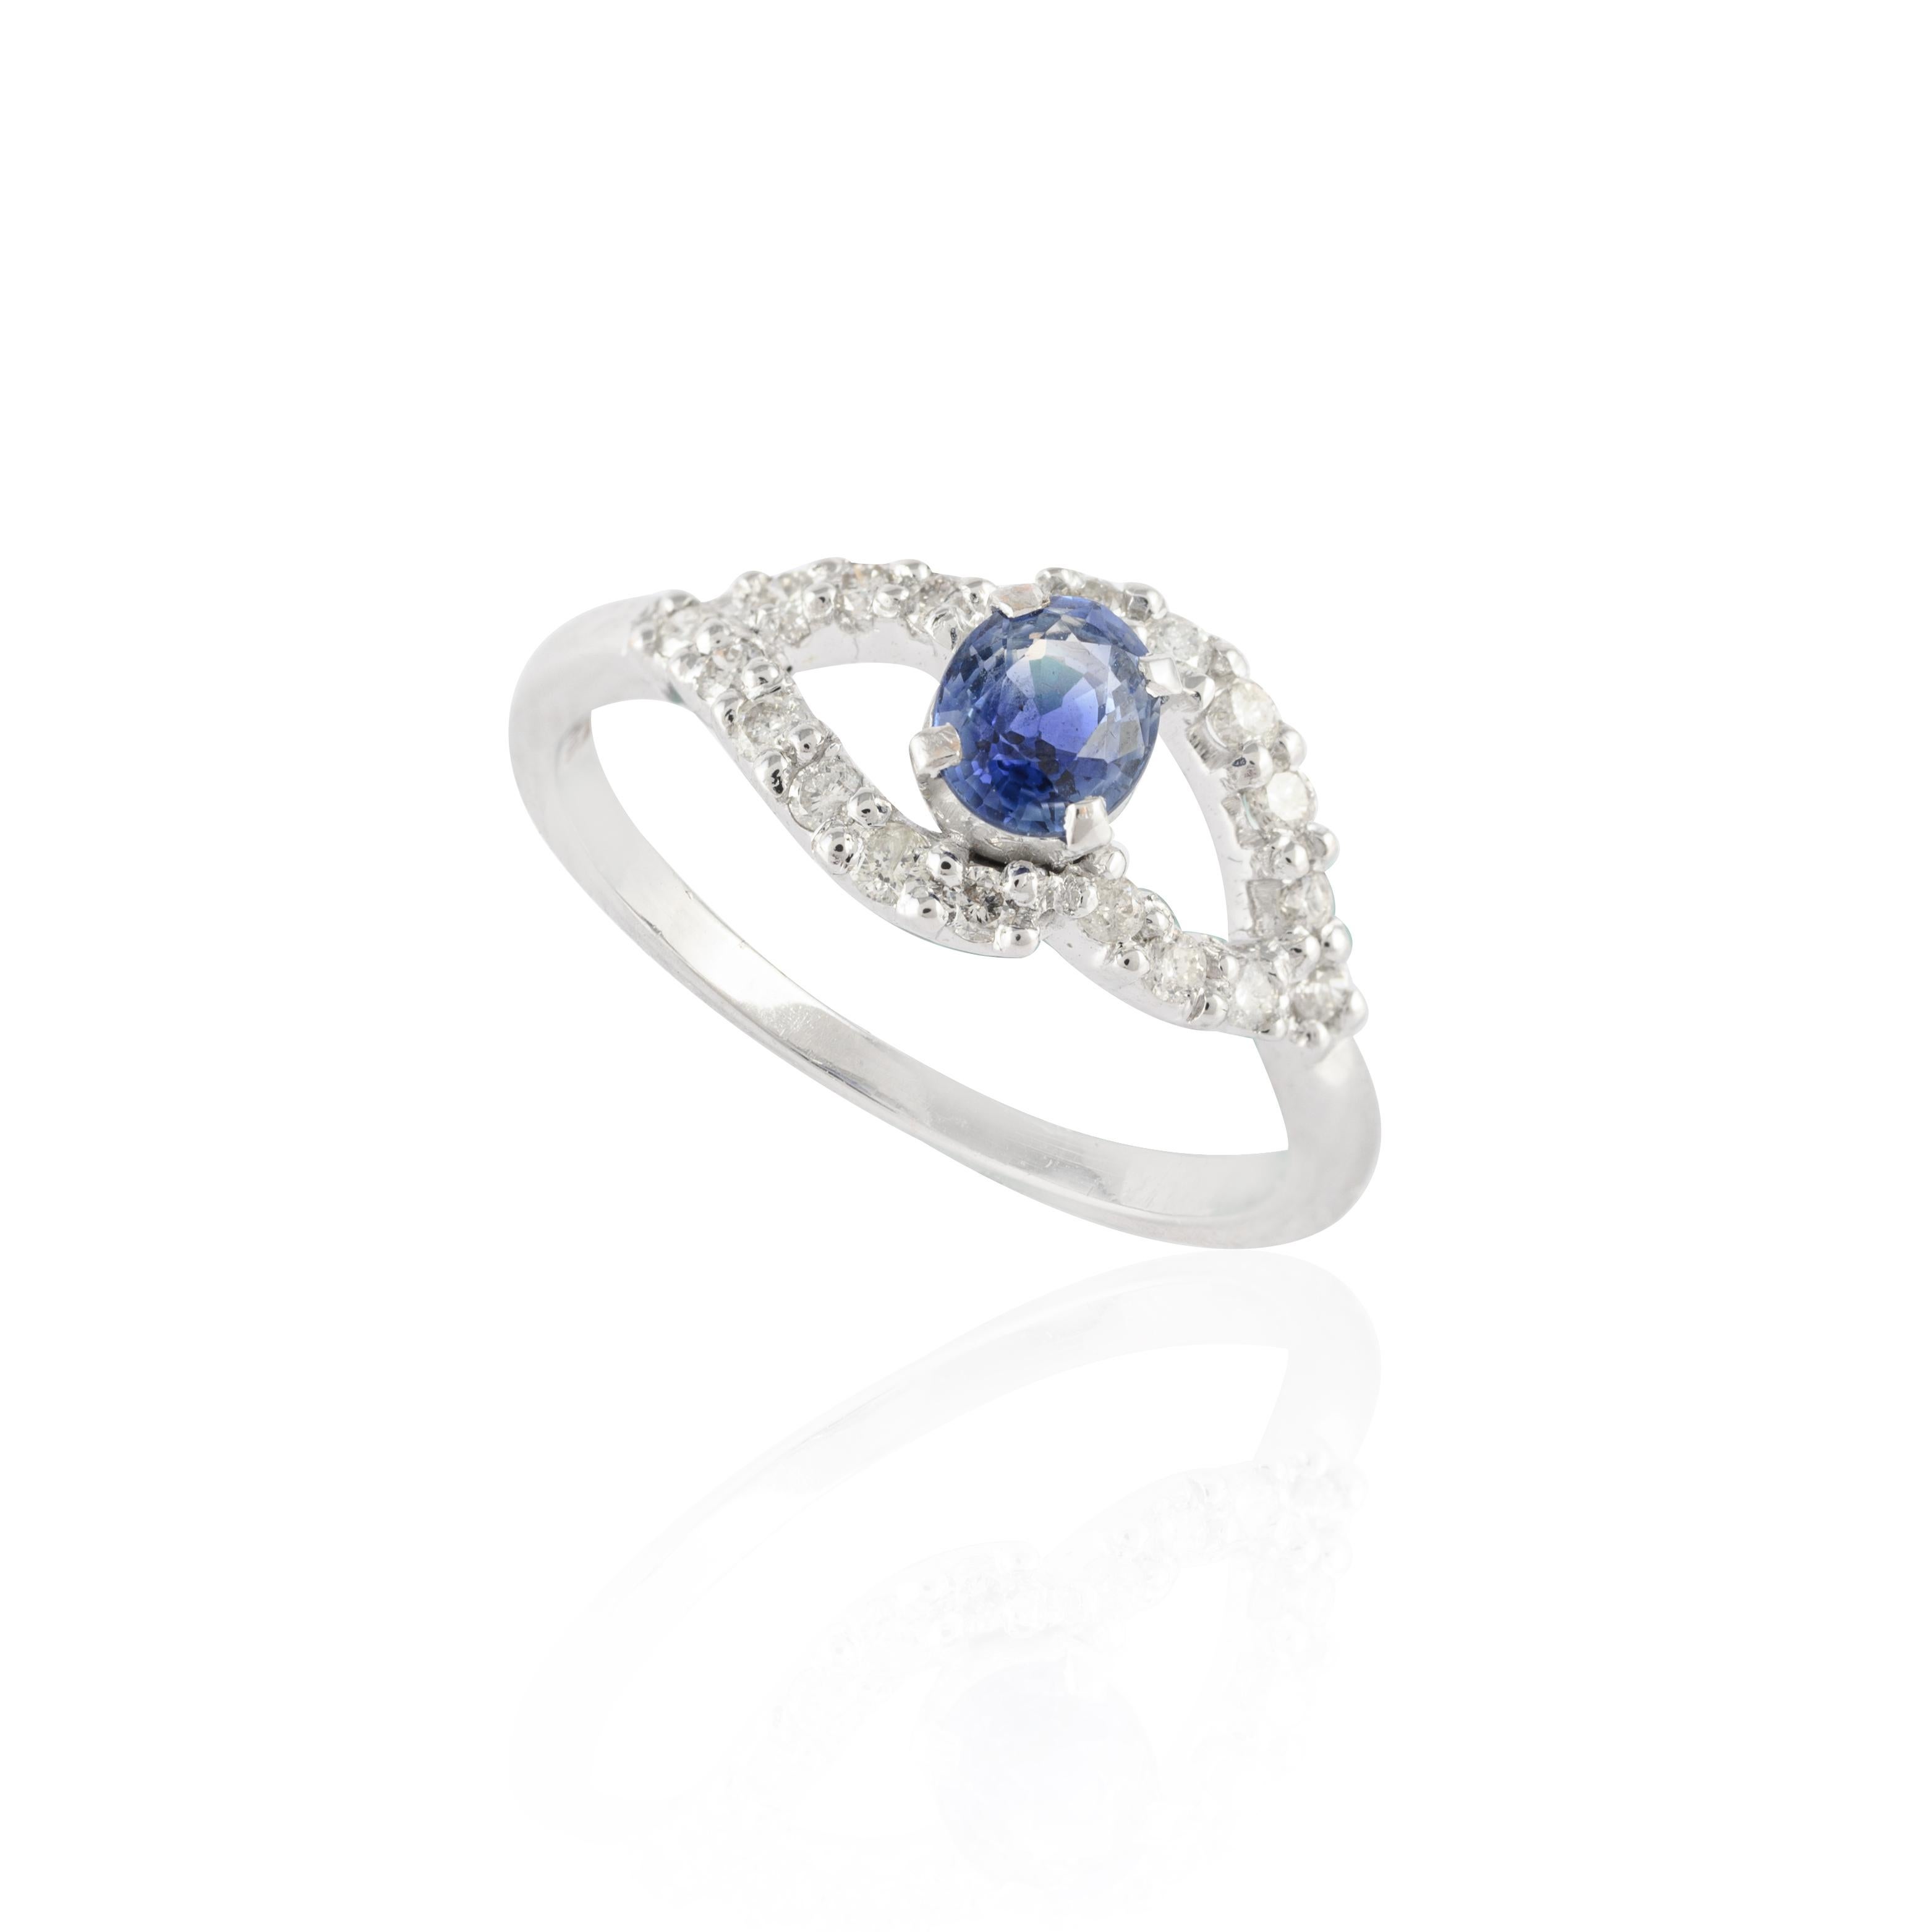 For Sale:  Alluring Blue Sapphire Ring with Diamonds Set in 14K Solid White Gold 9